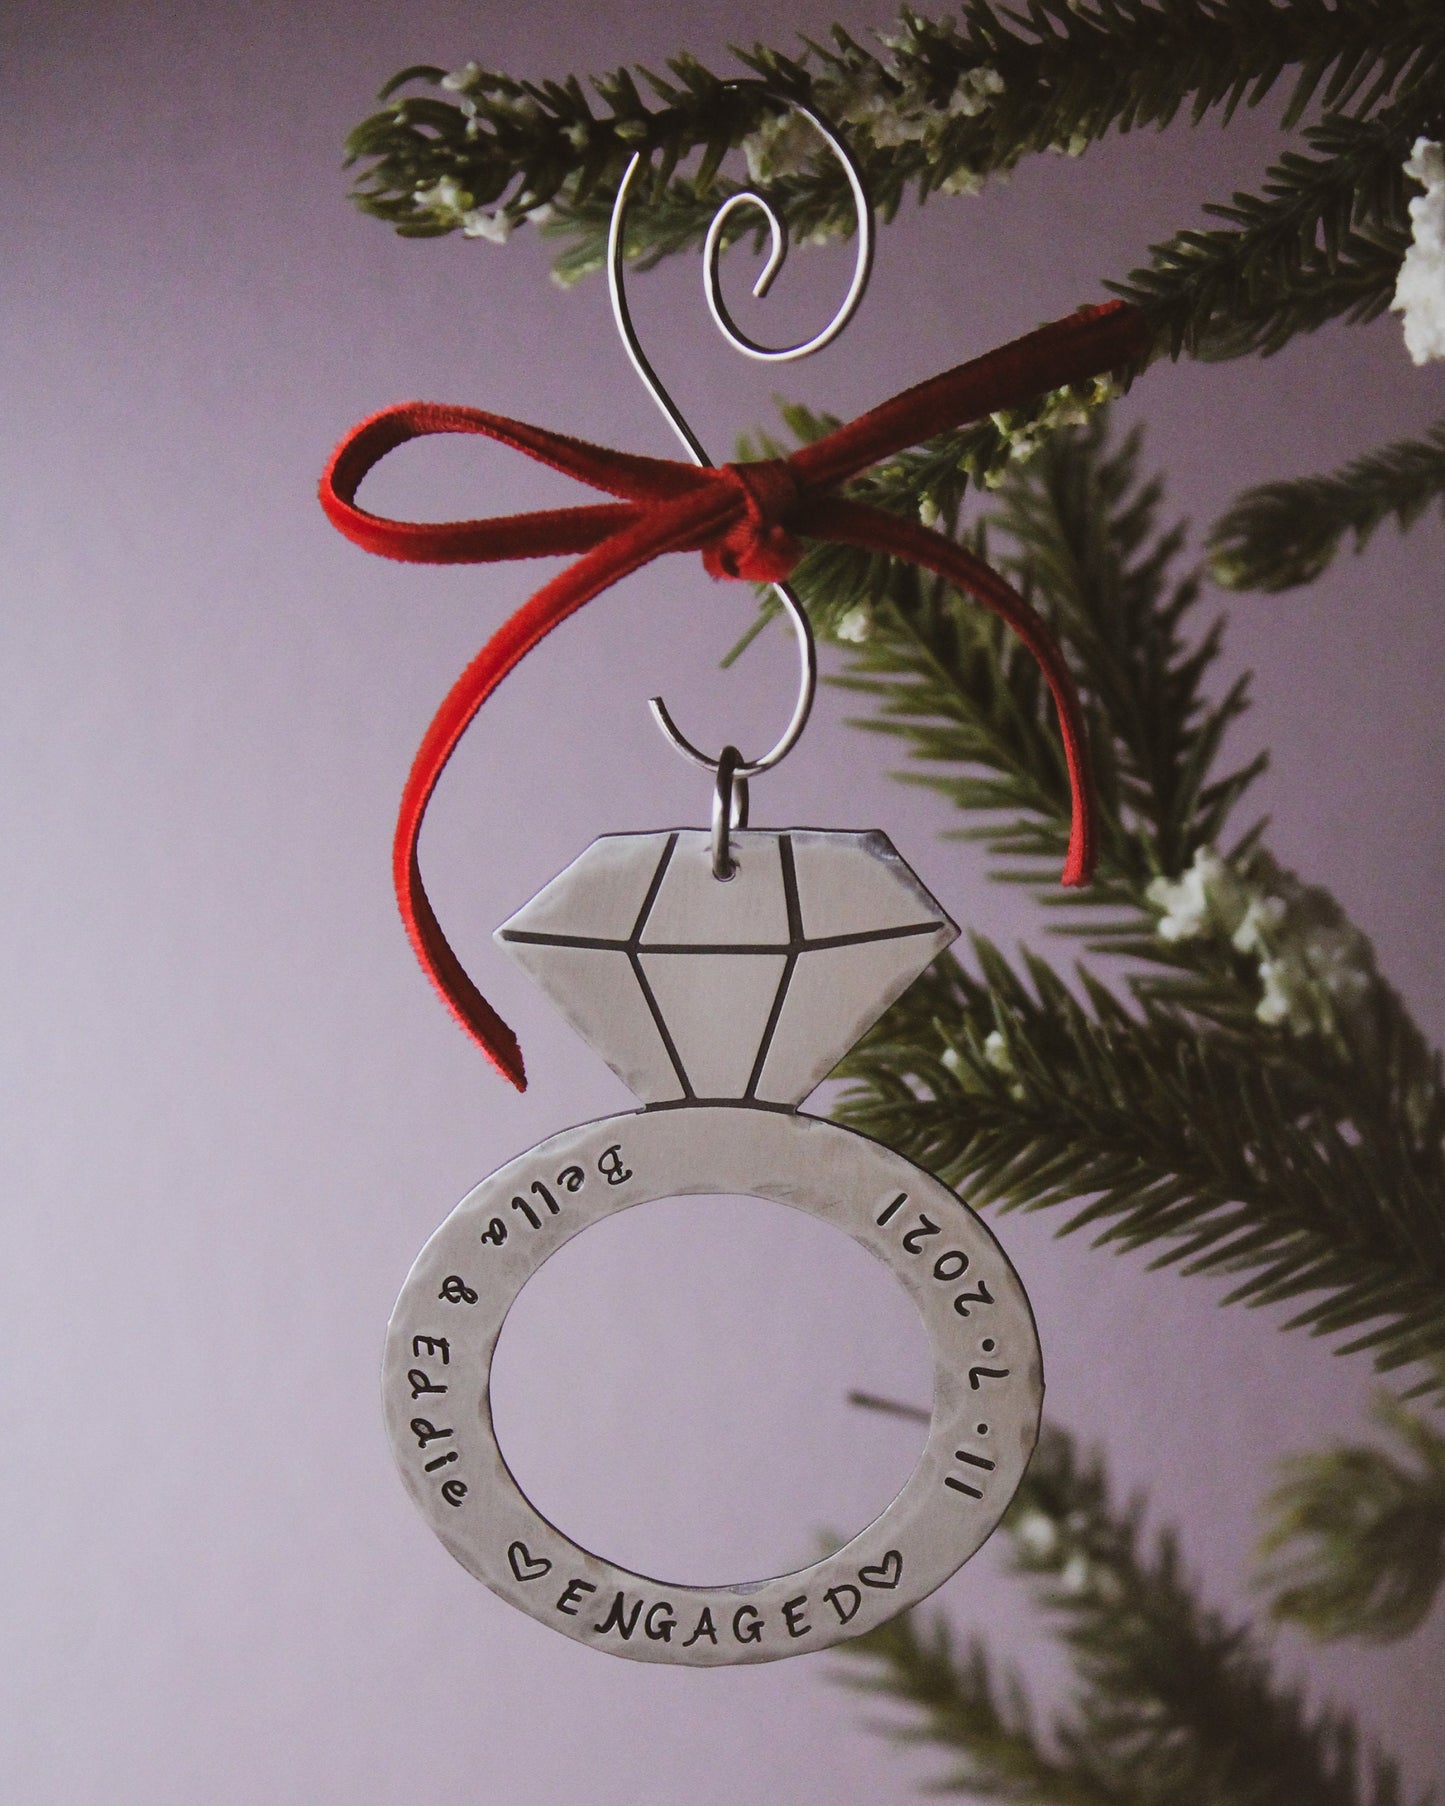 Personalized Engagement Ornament, Couples Christmas Ornament, Custom Christmas Gift, Just Engaged Gift, Engagement Ornament, Hand Stamped